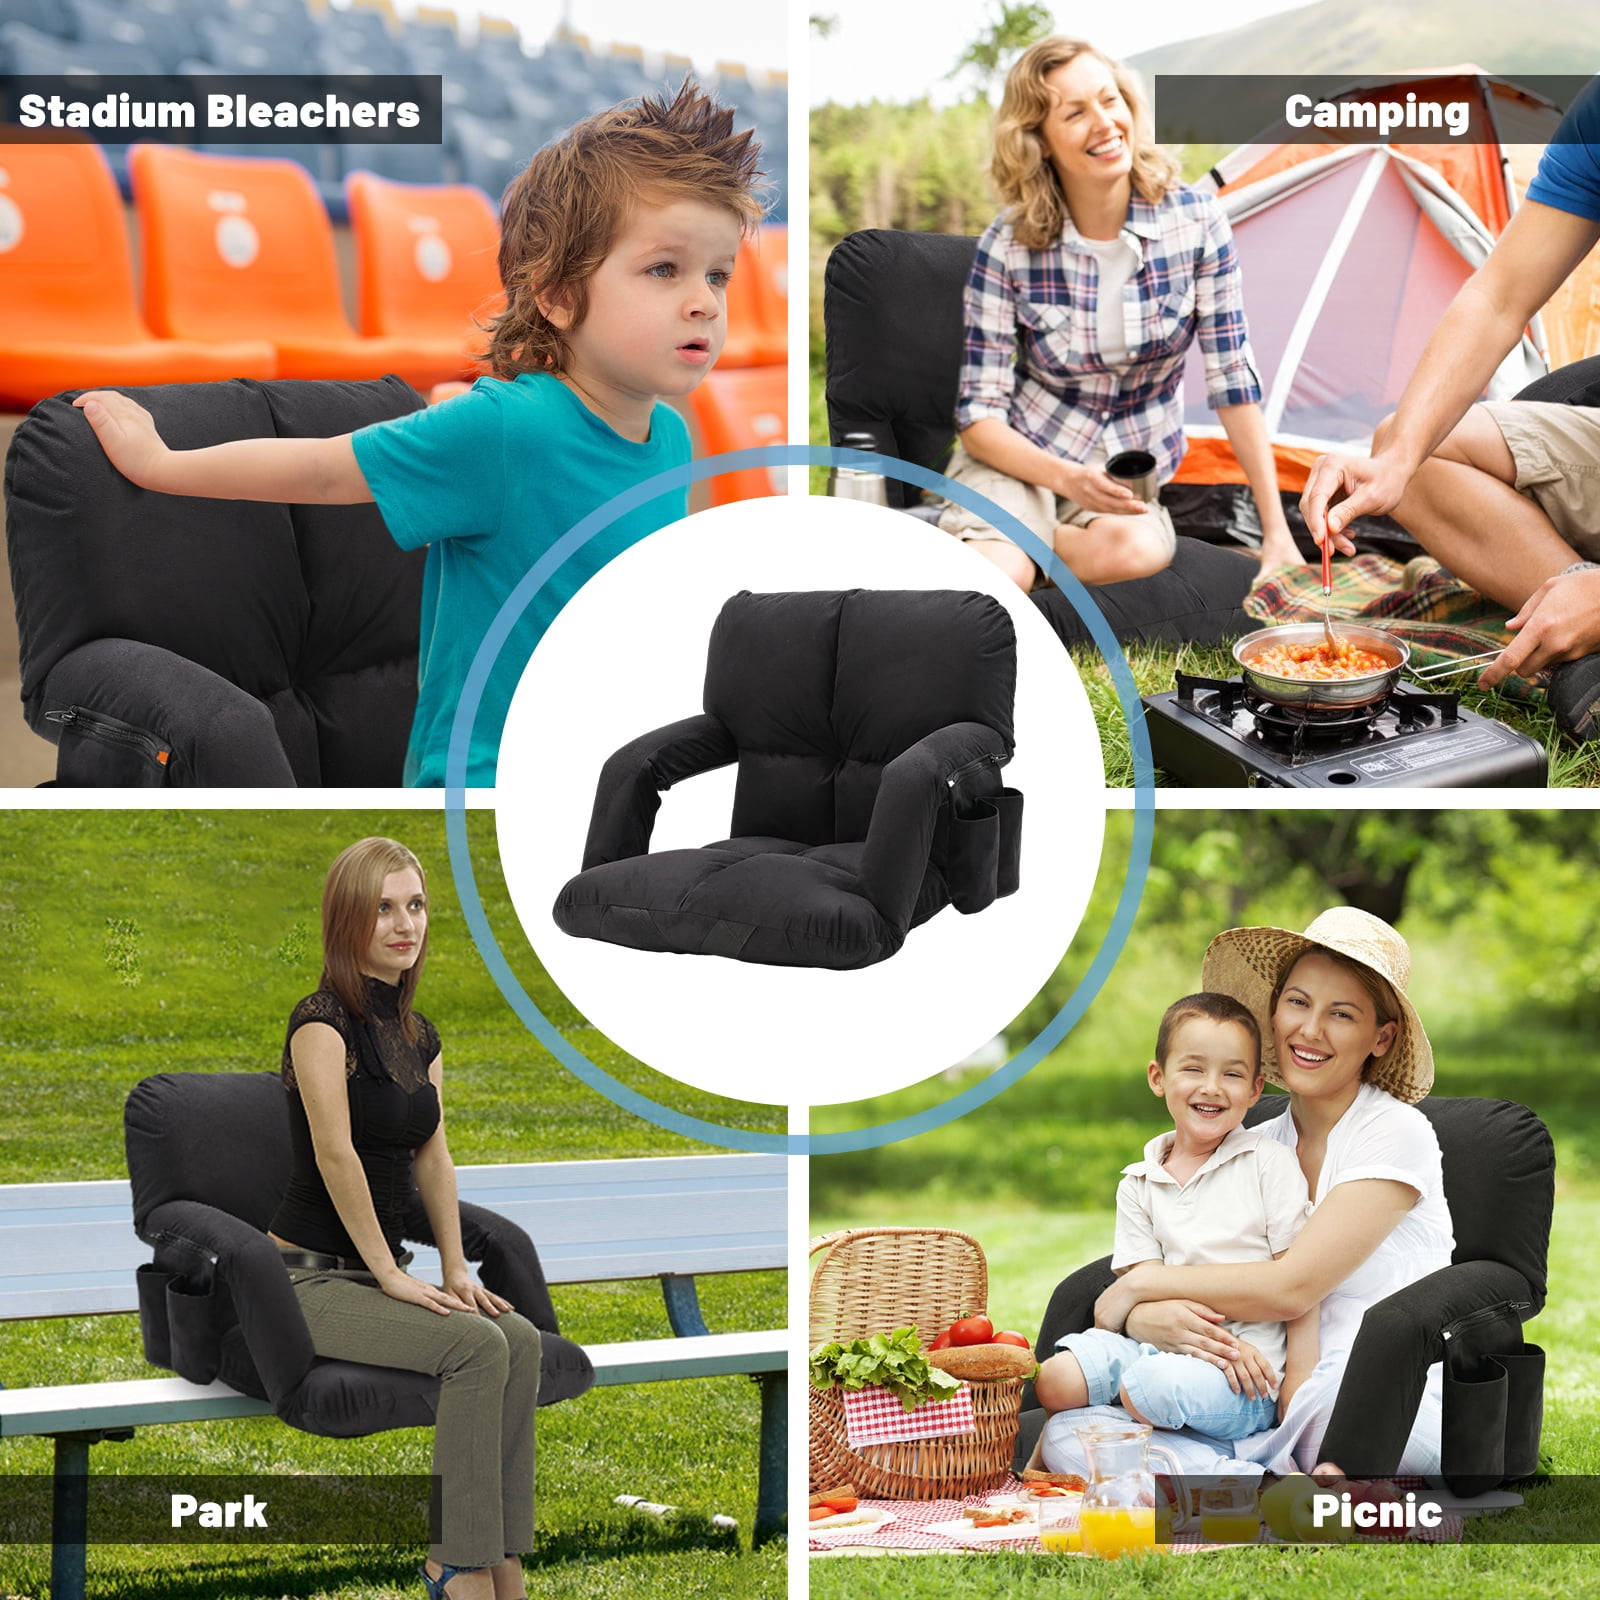 Foldable Bleacher Chair with 6 Reclining Positions and Padded Cushion-Black | Costway